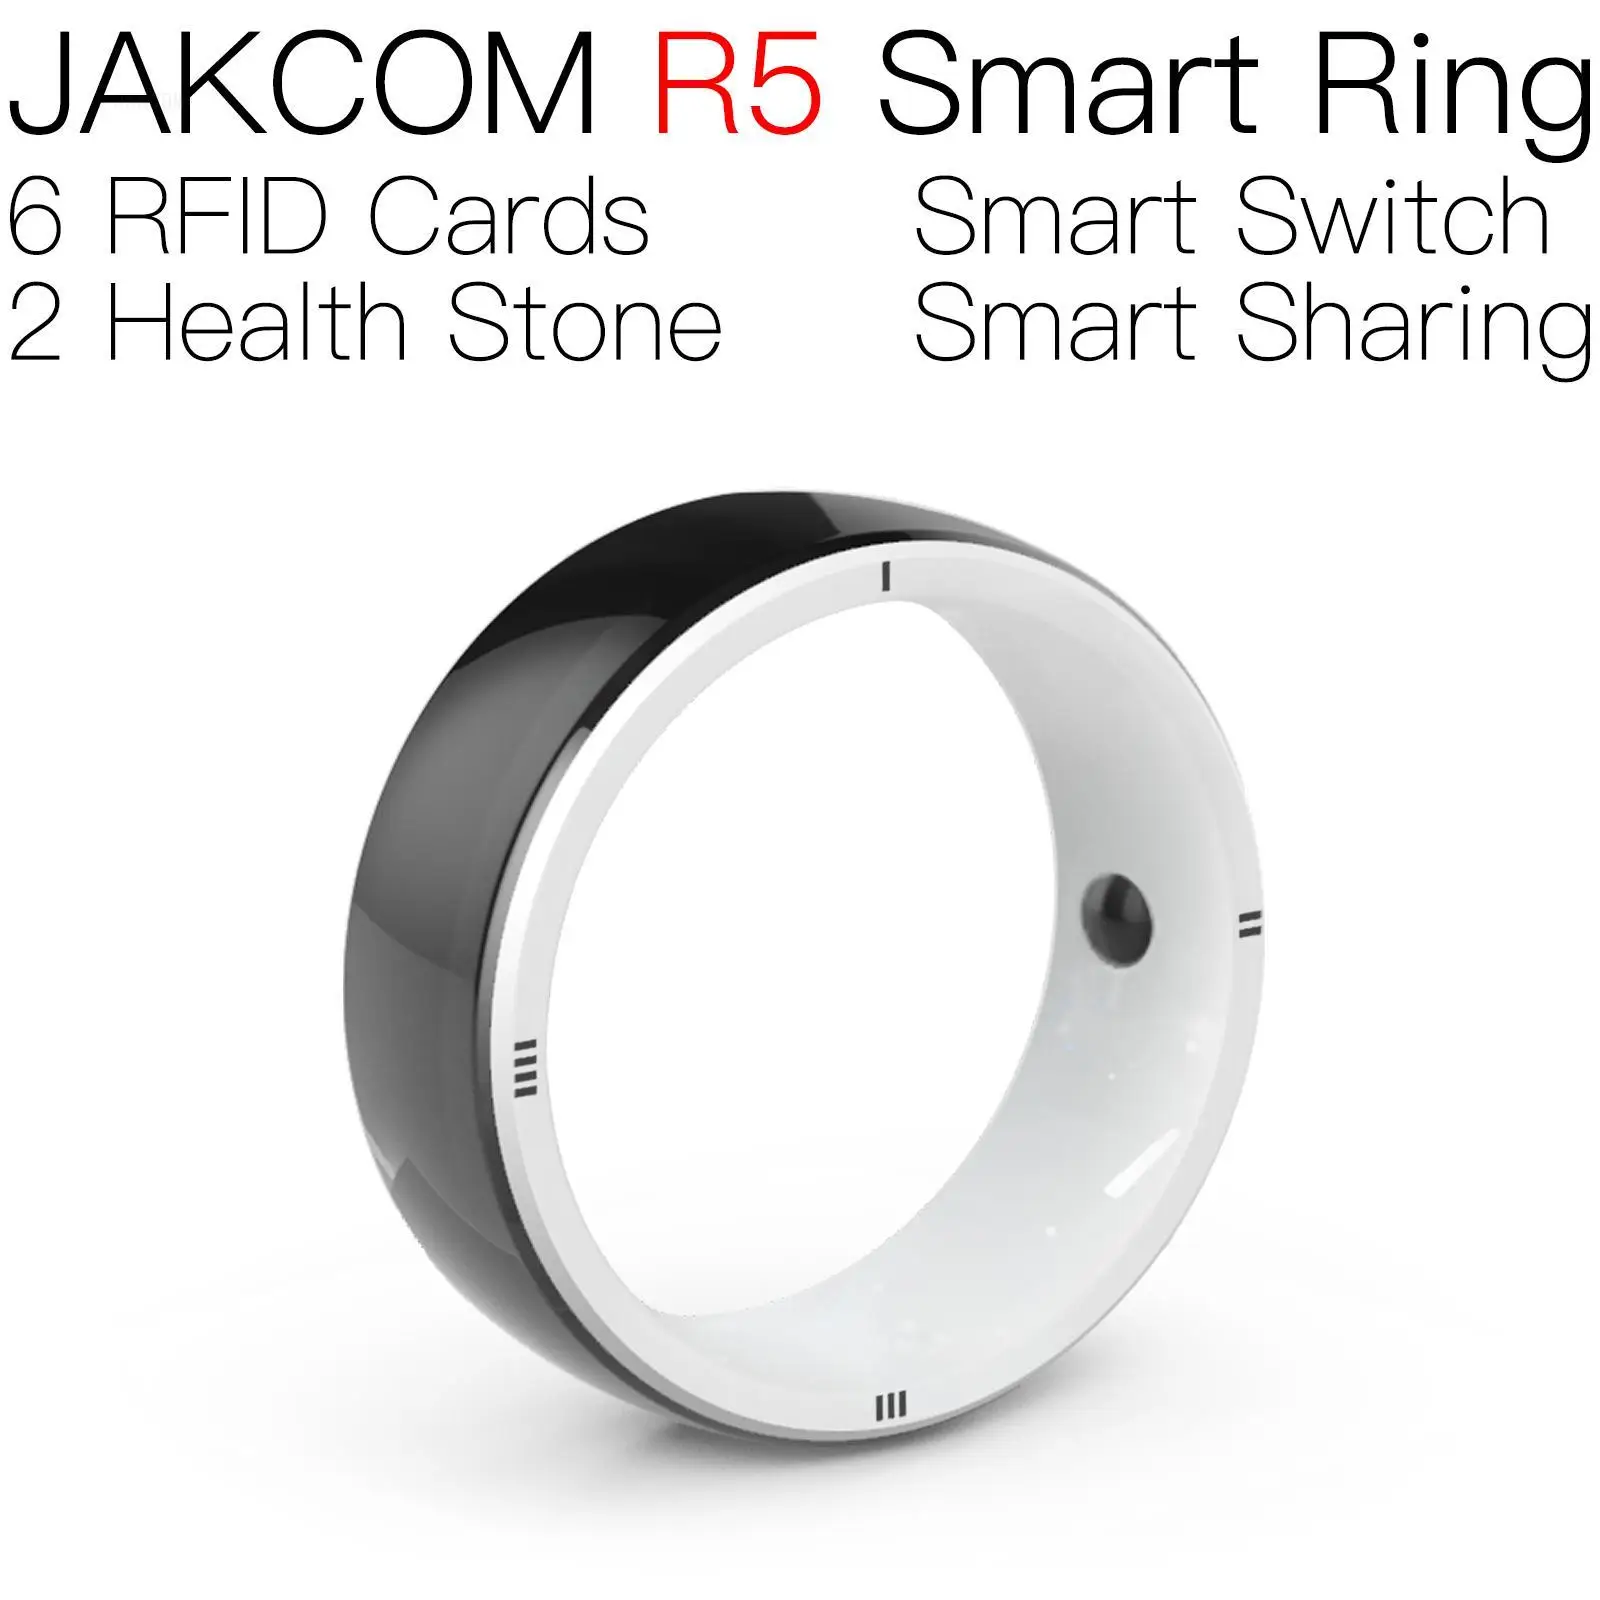 

JAKCOM R5 Smart Ring Newer than apertura nfc mini tag classic 1k uid writable rfid tags weather color station with kay